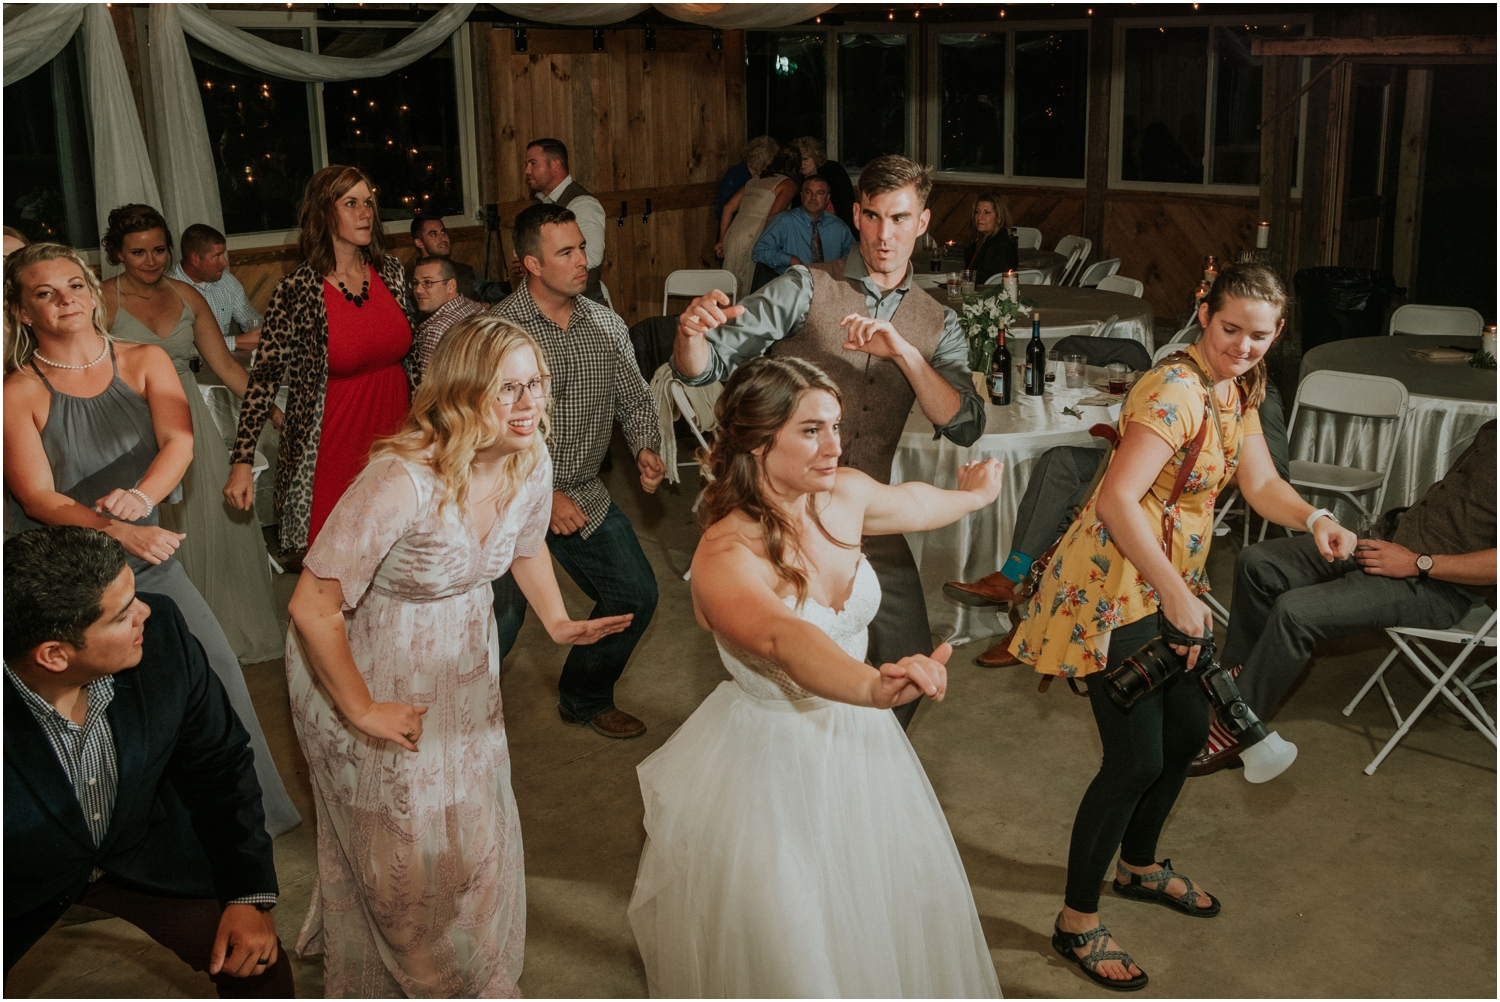 Like I said earlier- I WILL wobble with you at your wedding.